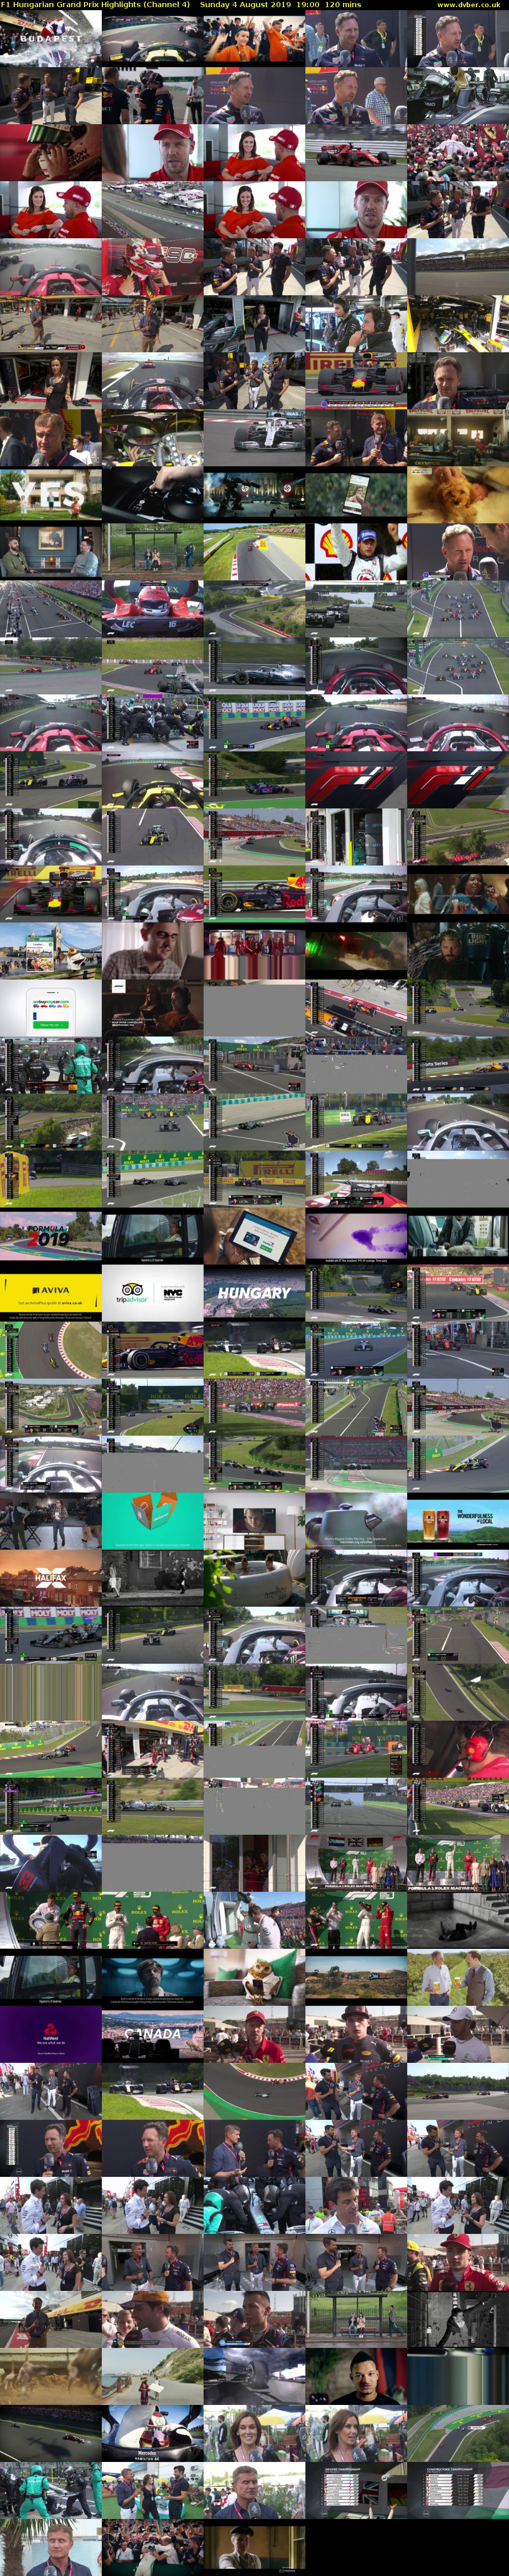 F1 Hungarian Grand Prix Highlights (Channel 4) Sunday 4 August 2019 19:00 - 21:00